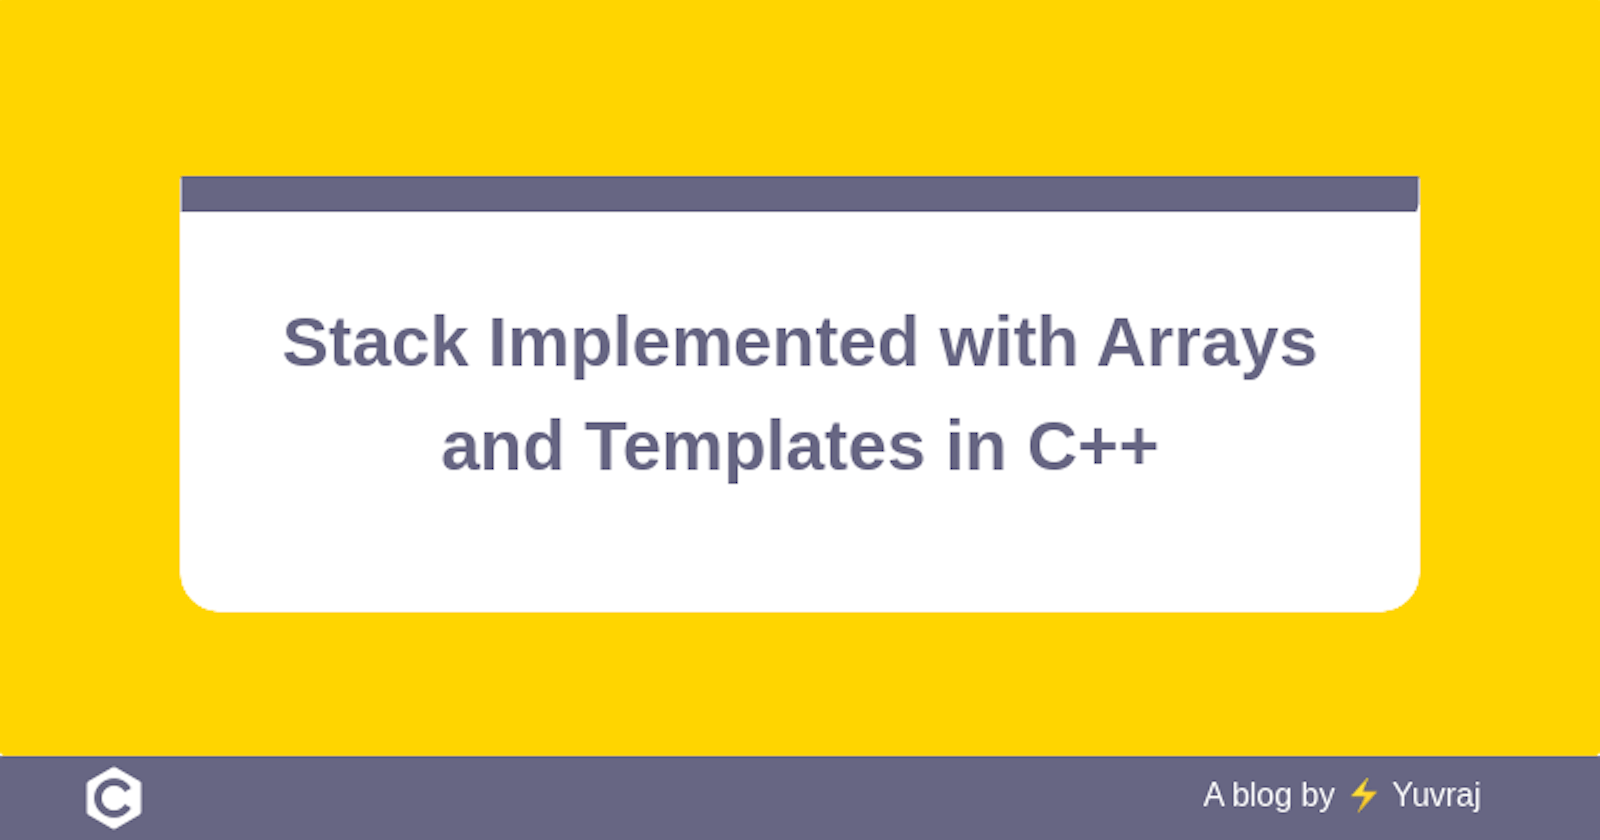 Stack Implemented with Arrays and Templates in C++